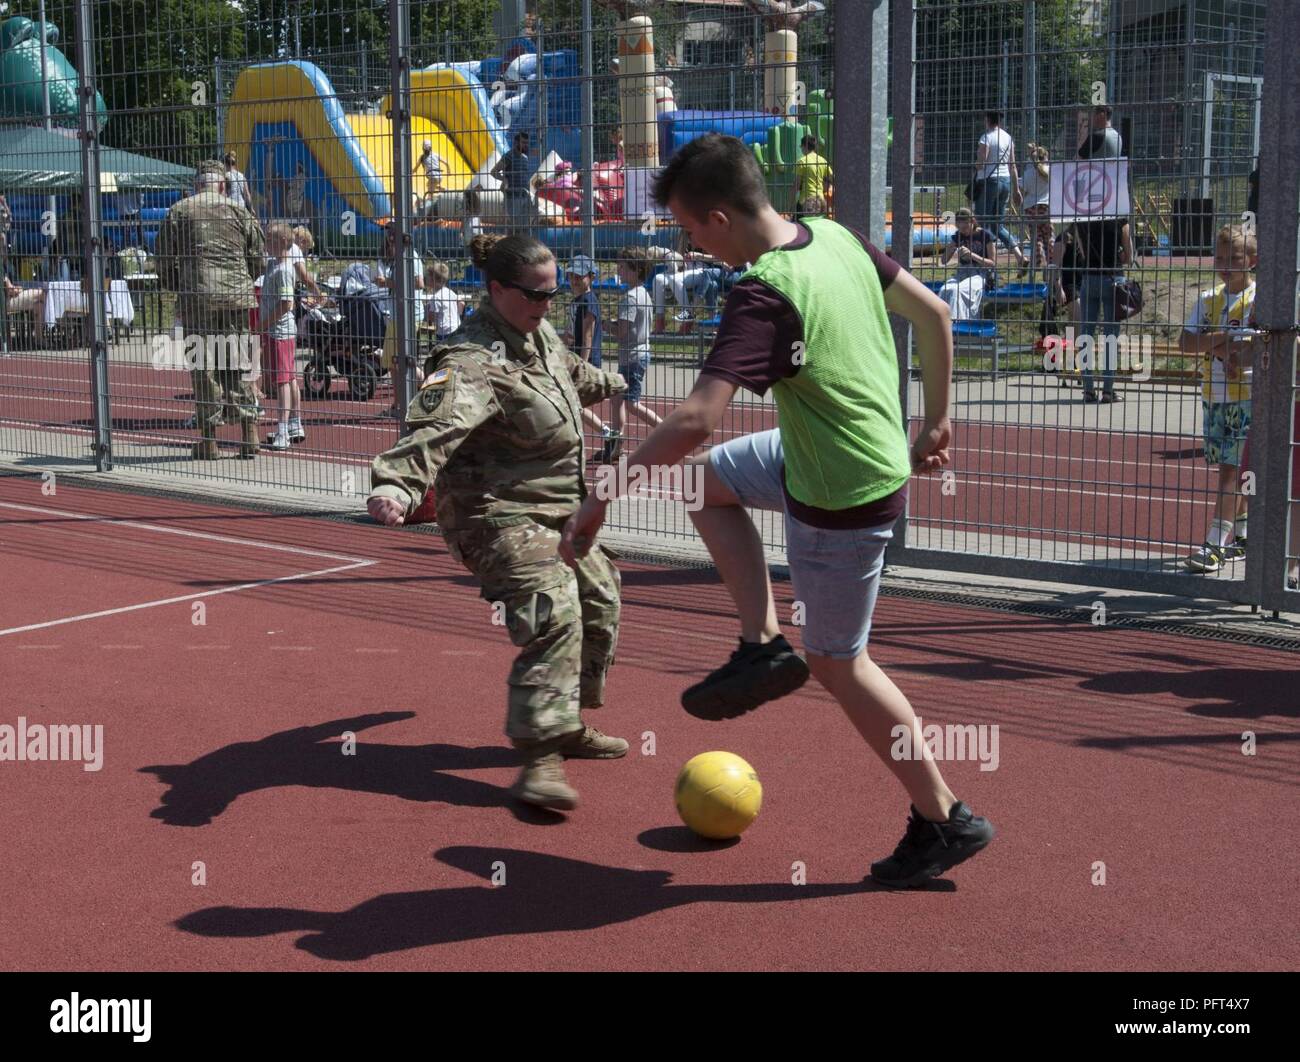 U.S. Army Maj. Emily Lynds, personnel officer assigned to Resolute Castle 18, 218th Maneuver Enhancement Brigade, South Carolina Army National Guard, plays soccer against a student from Boleslawiec Primary School Number 4 during their school festival in Boleslawiec, Poland, May 26, 2018. Resolute Castle Soldiers were special guests of the festival and participated in sporting events and pottery painting with the primary school children. Stock Photo